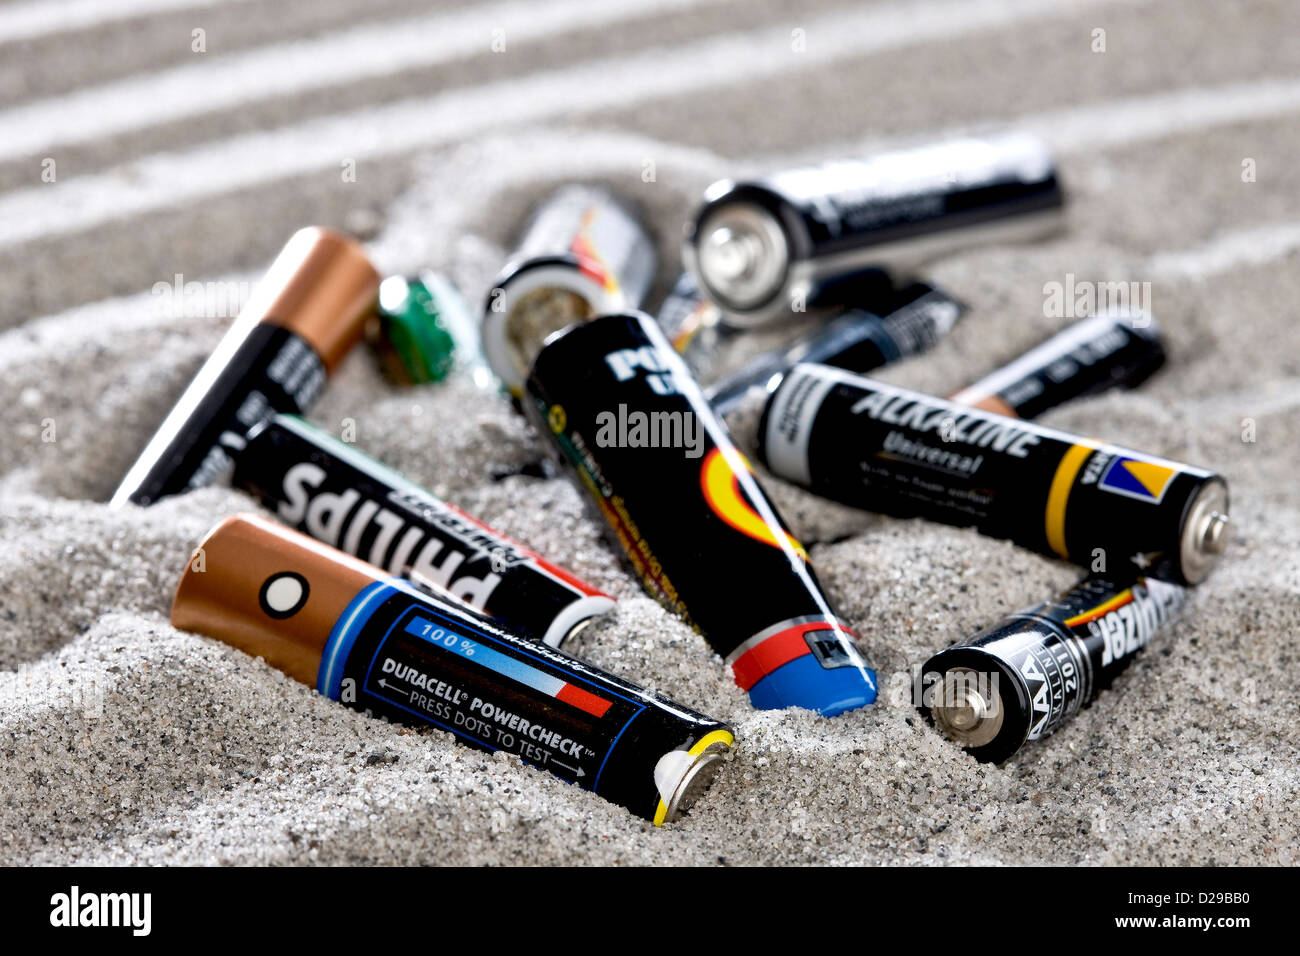 Battery waste on the beach Stock Photo